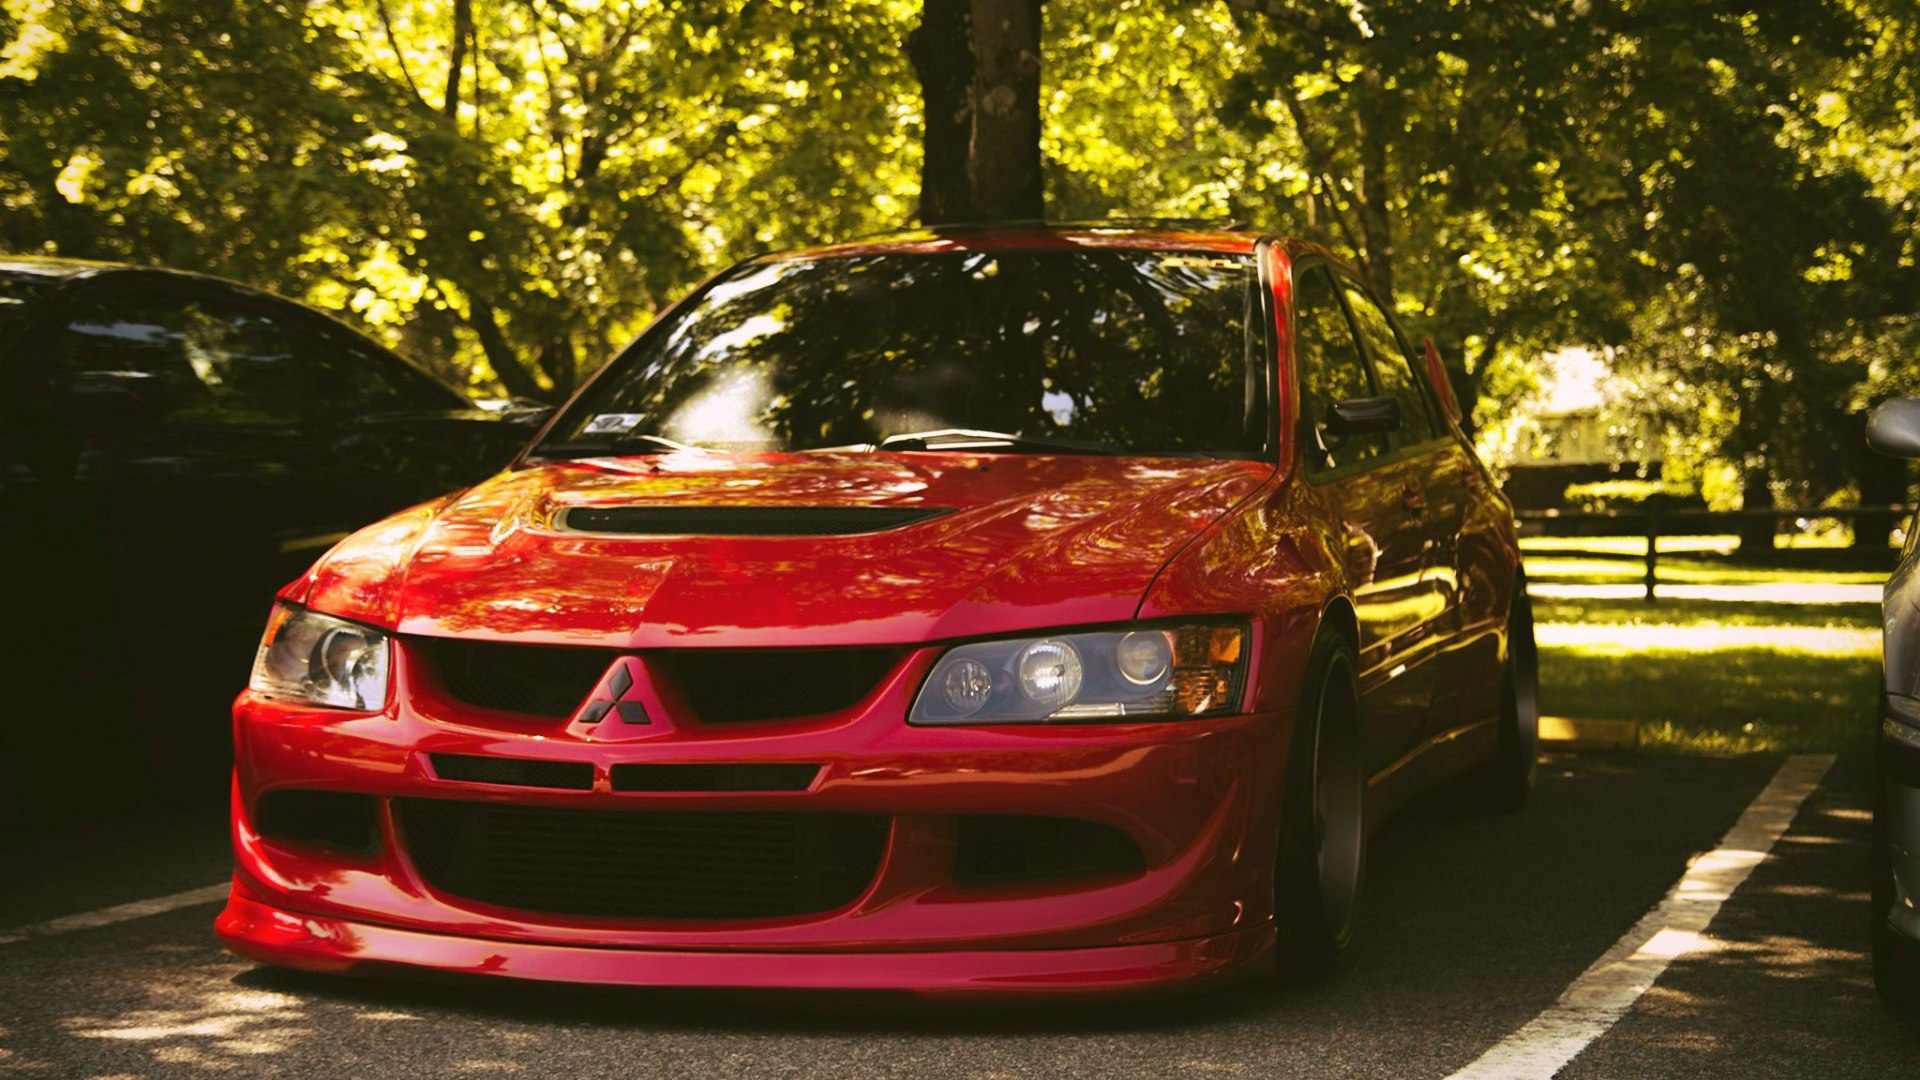 Red Mitsubishi Lancer Evolution Ix Wallpapers And Images , HD Wallpaper & Backgrounds